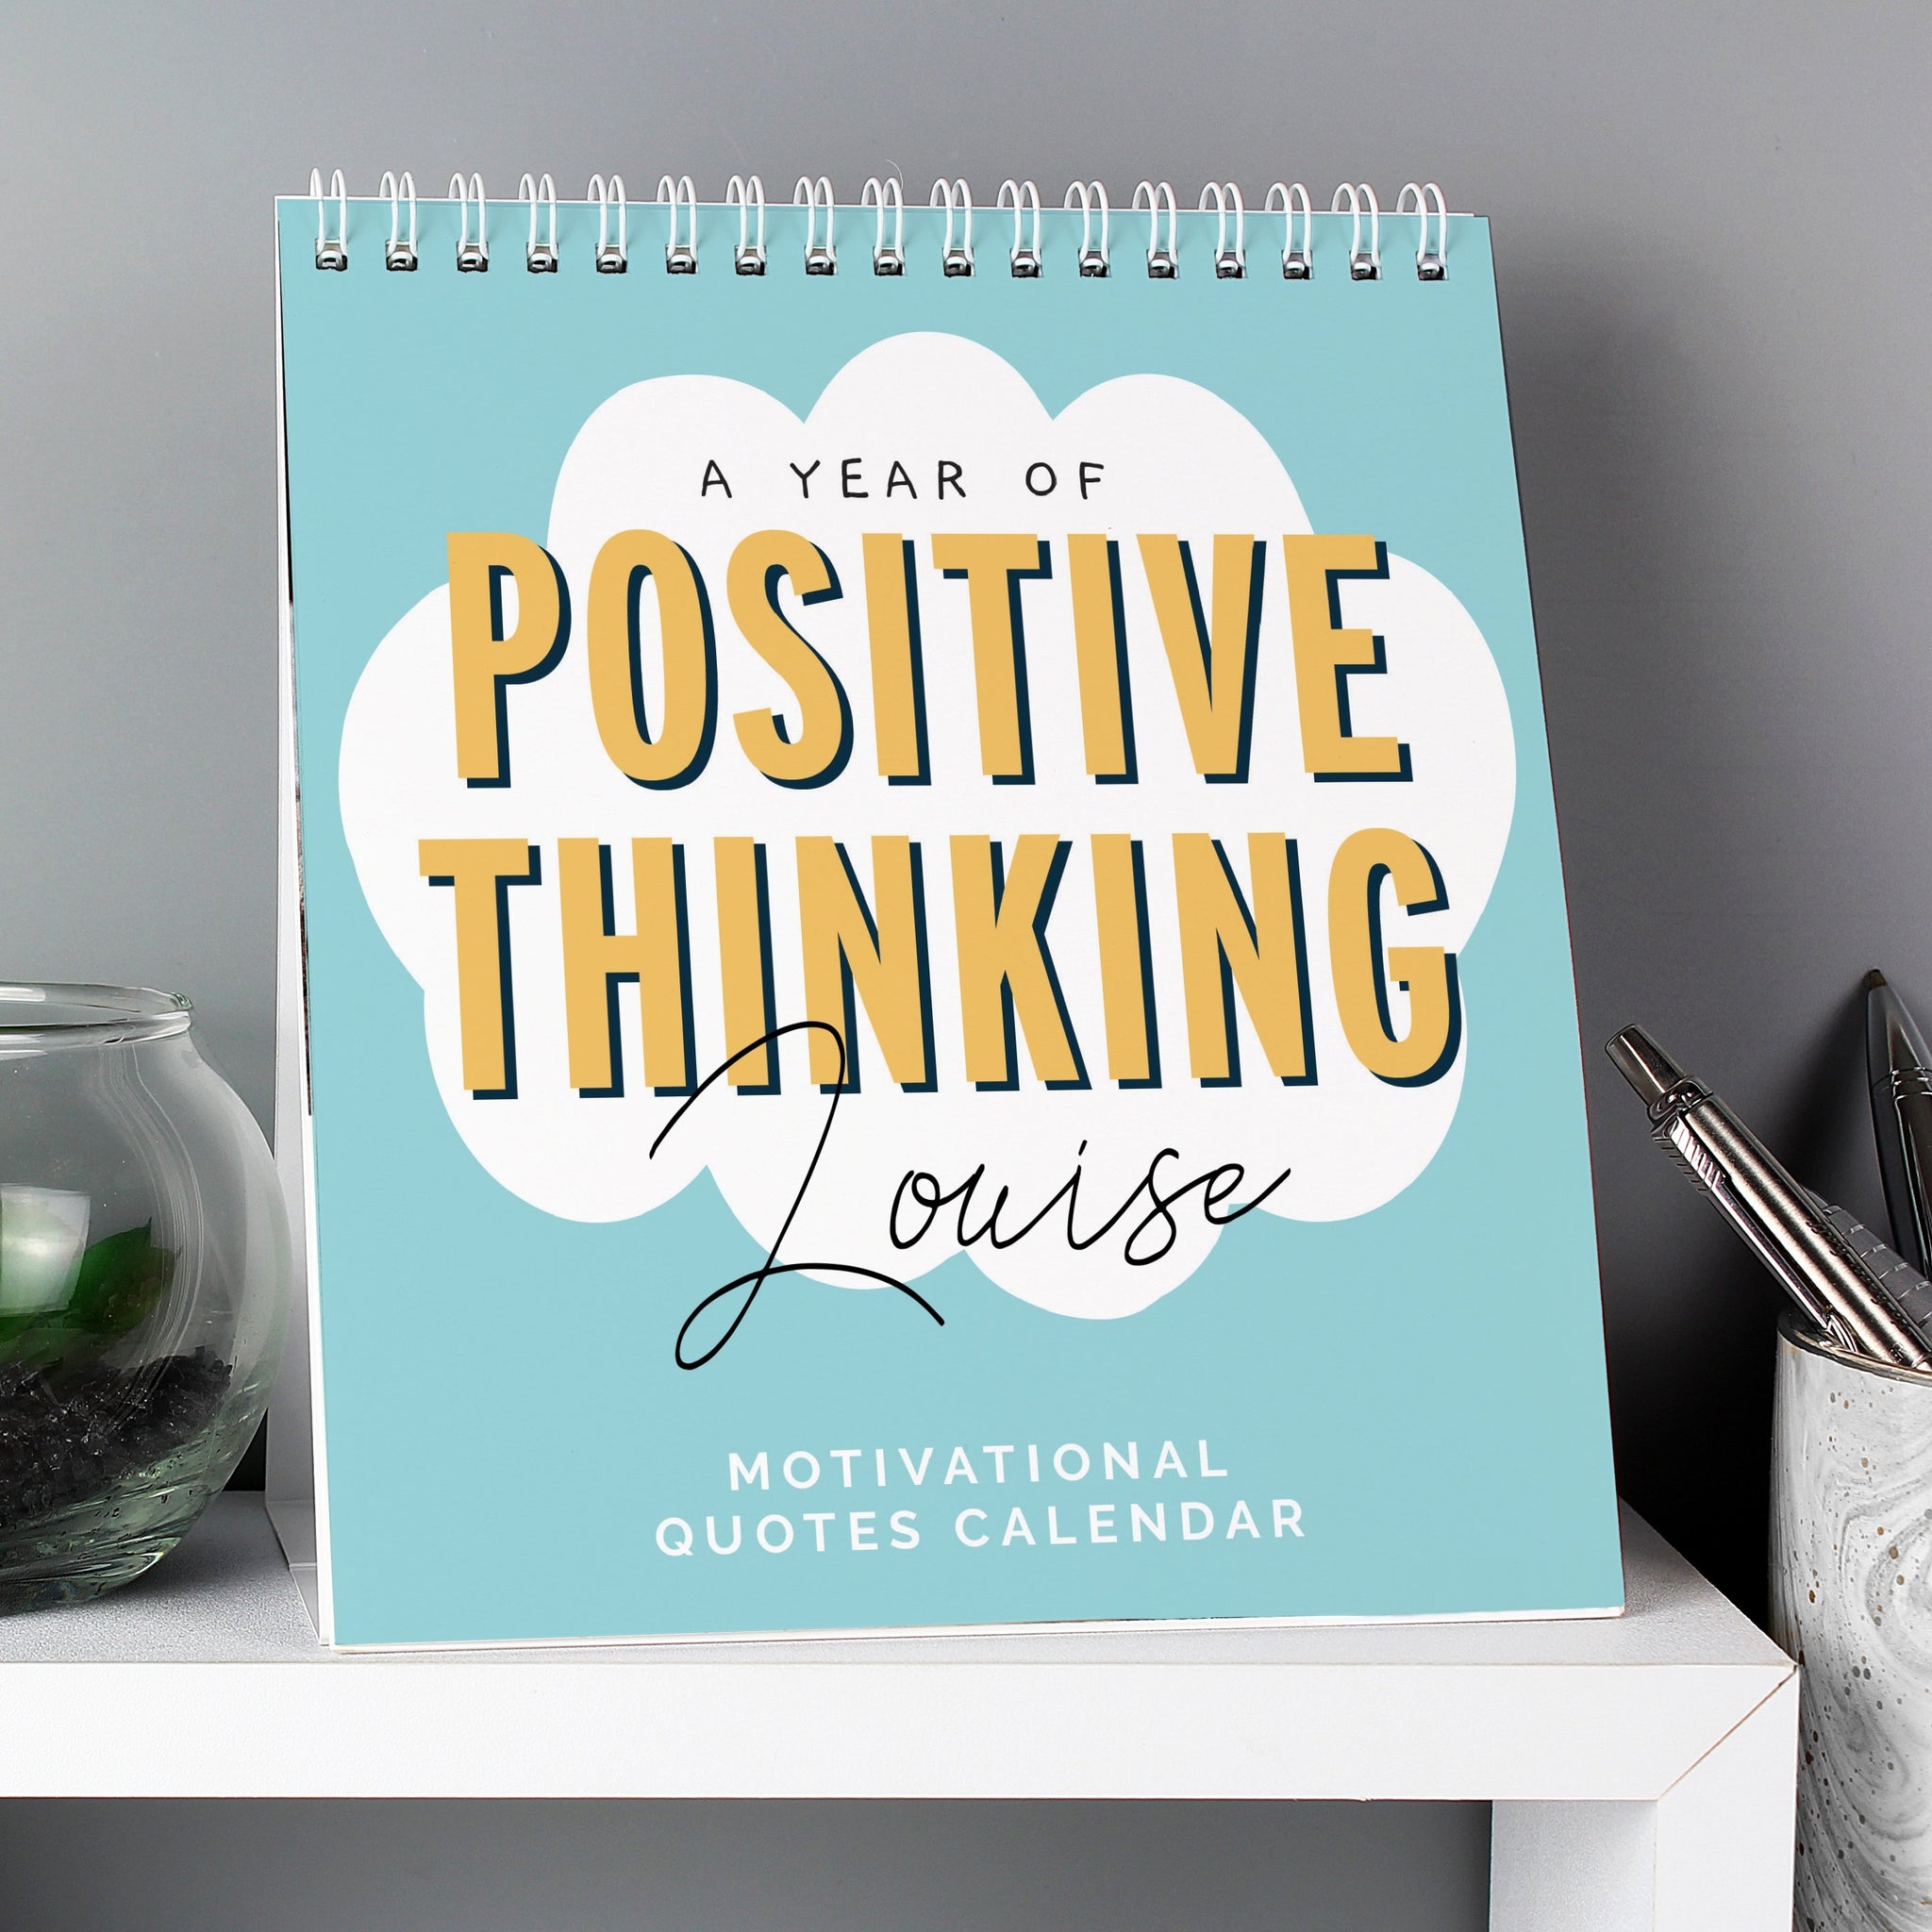 Personalised Motivational Quotes Desk Calendar Gifts247.co.uk